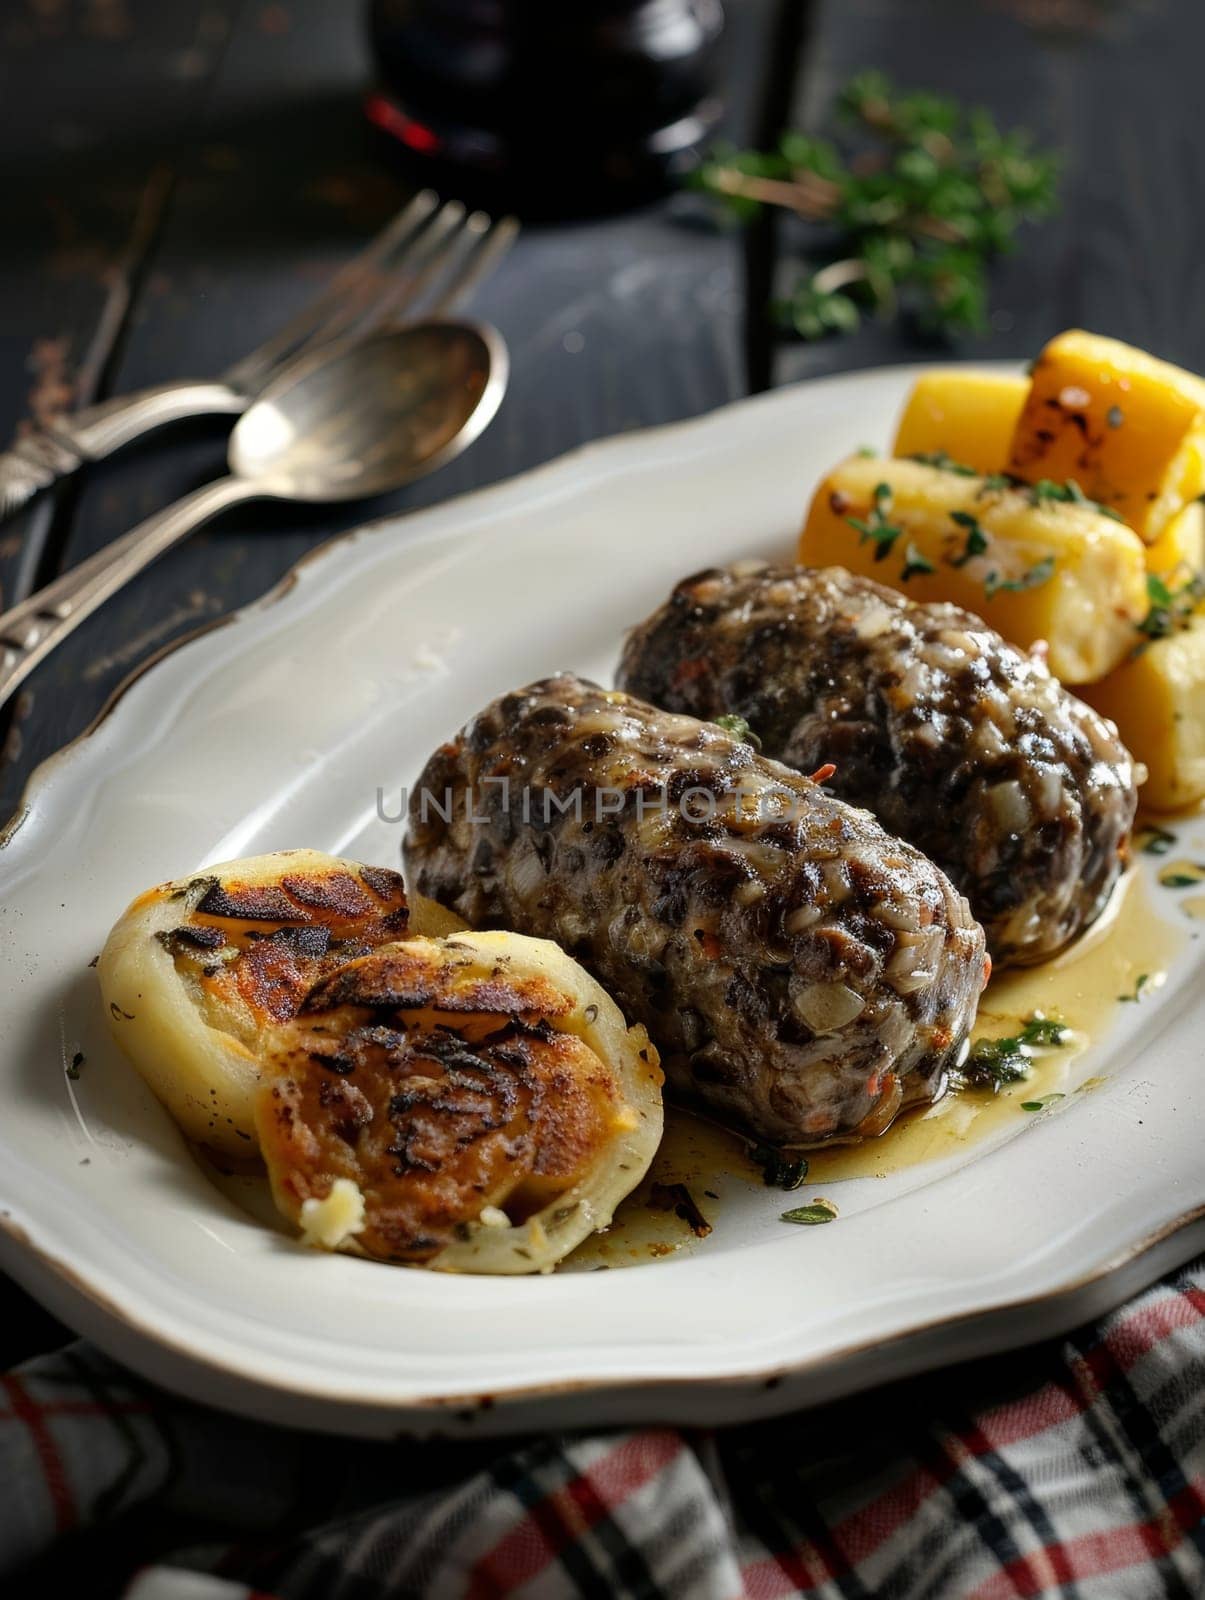 Authentic Scottish haggis dish with traditional accompaniments of mashed turnips neeps and potatoes tatties, served on a simple white platter. This classic, hearty meal represents cultural heritage